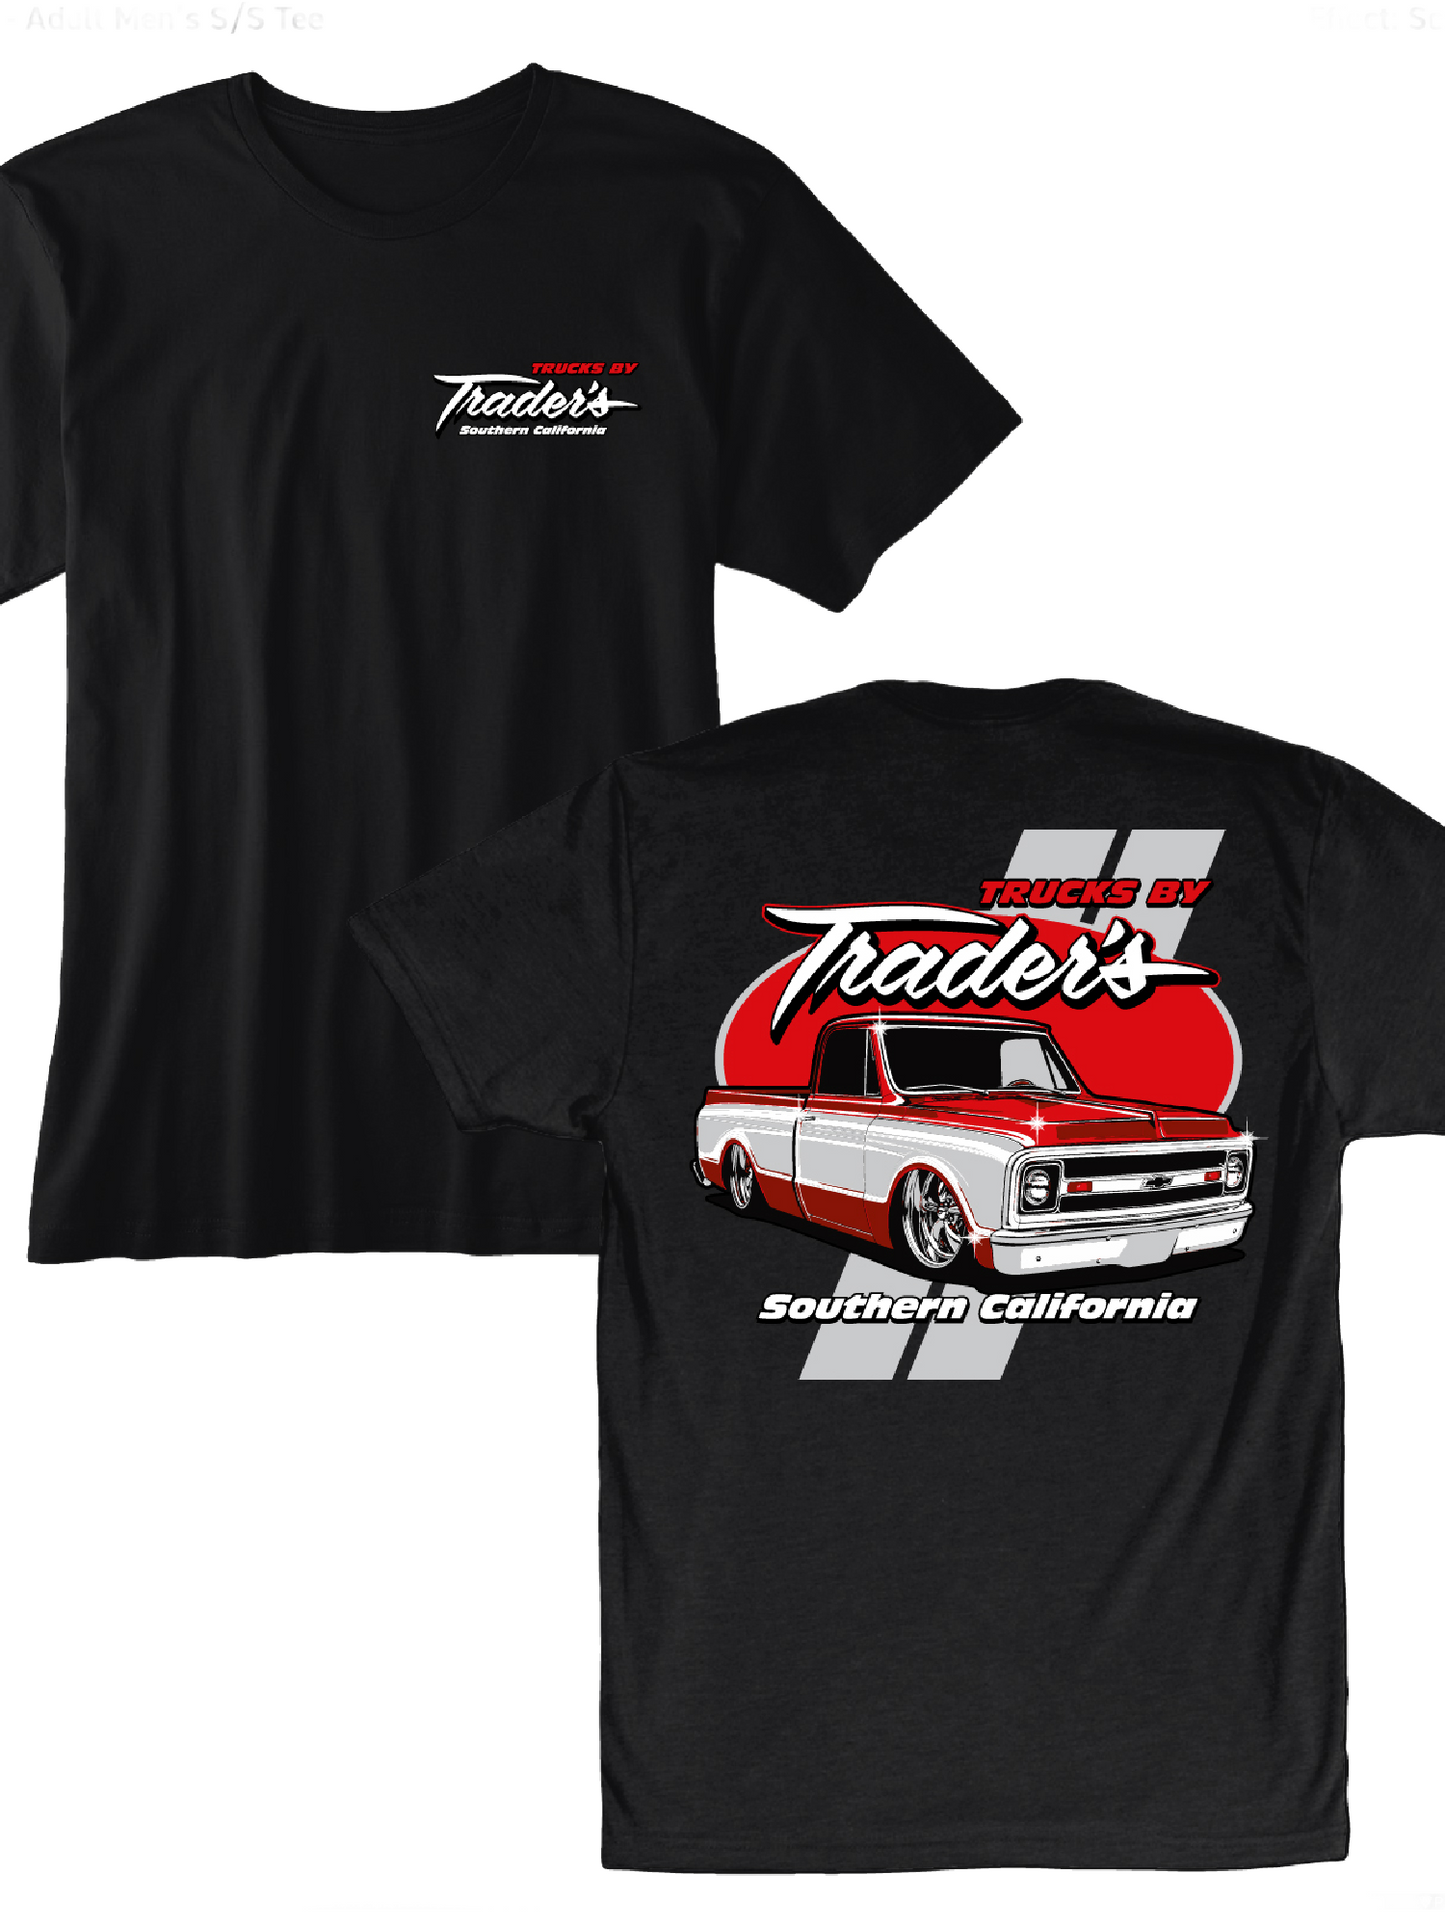 NEW! Limited Edition Tee - Trucks by Trader's Southern California C-10